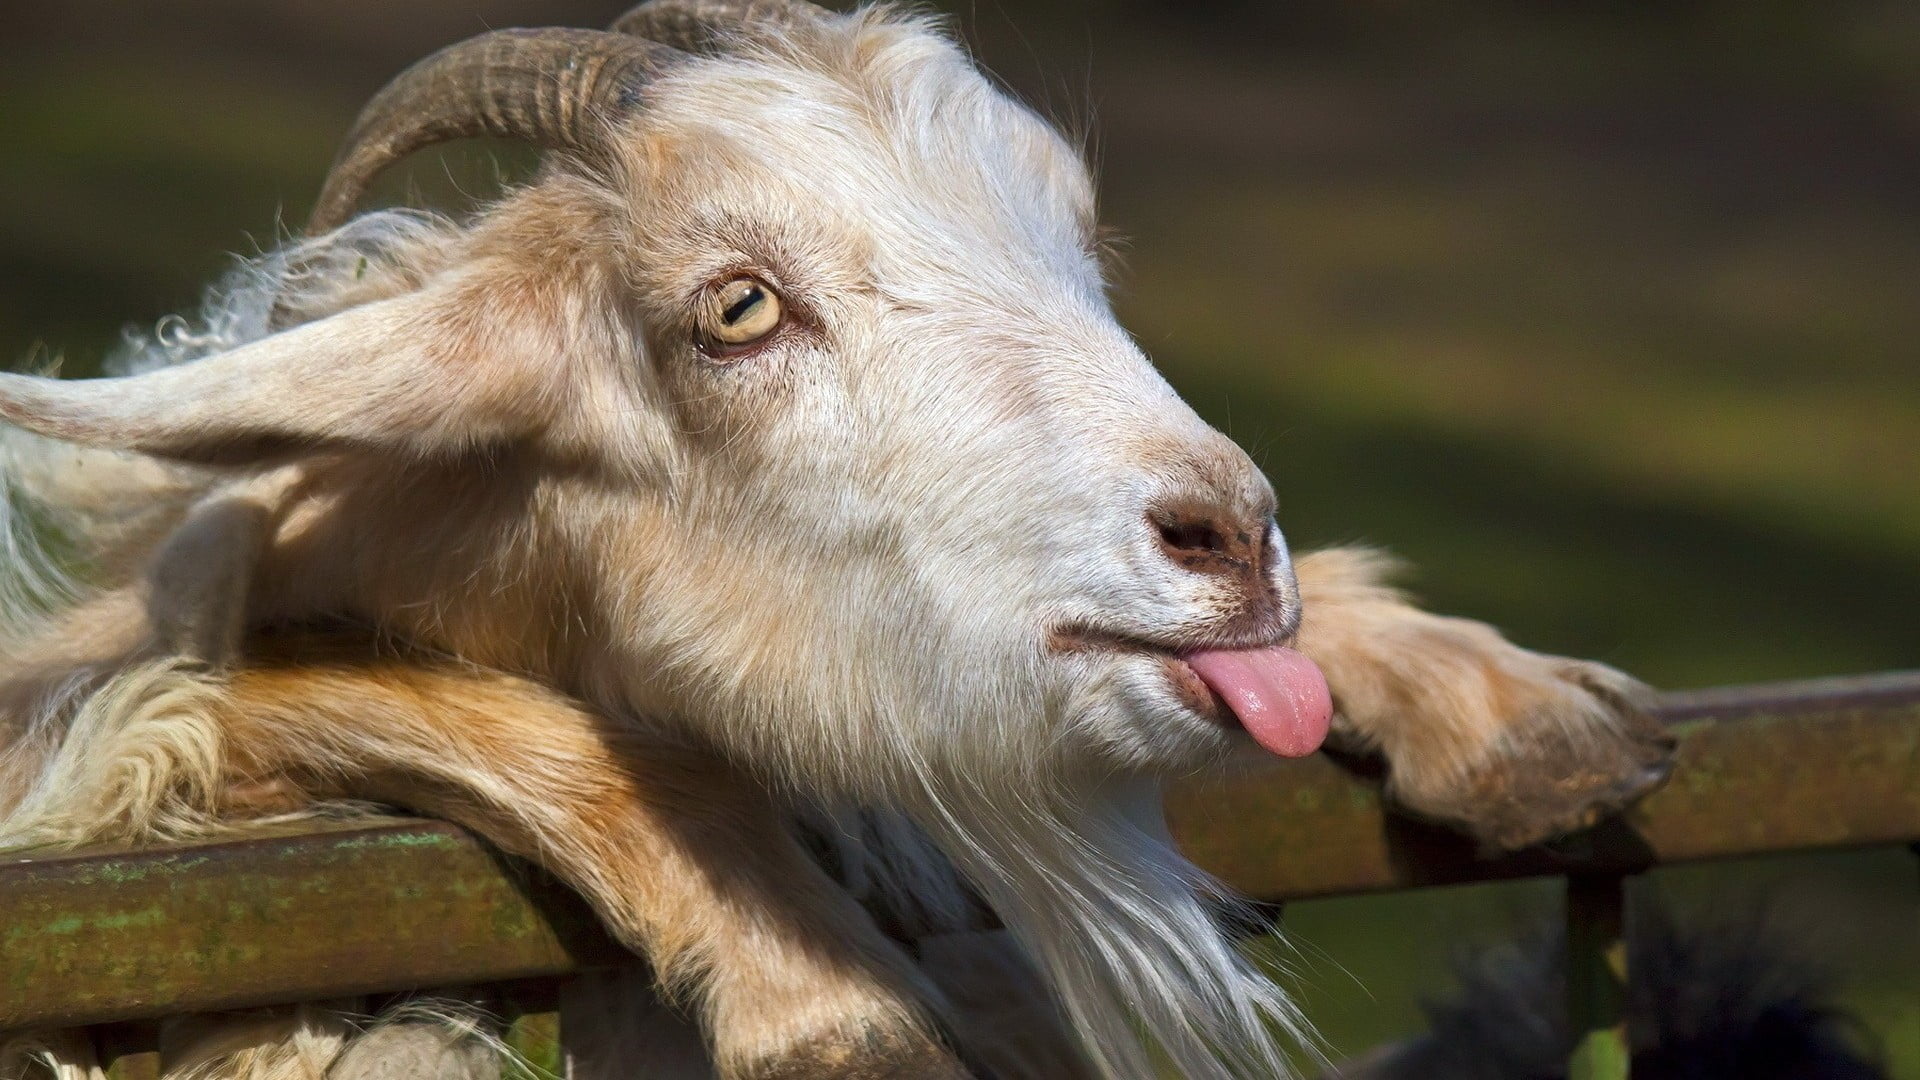 Indian Sports 1080p, 2k, 4k, 5k Hd Wallpapers Free - Funny Goat With Horns , HD Wallpaper & Backgrounds